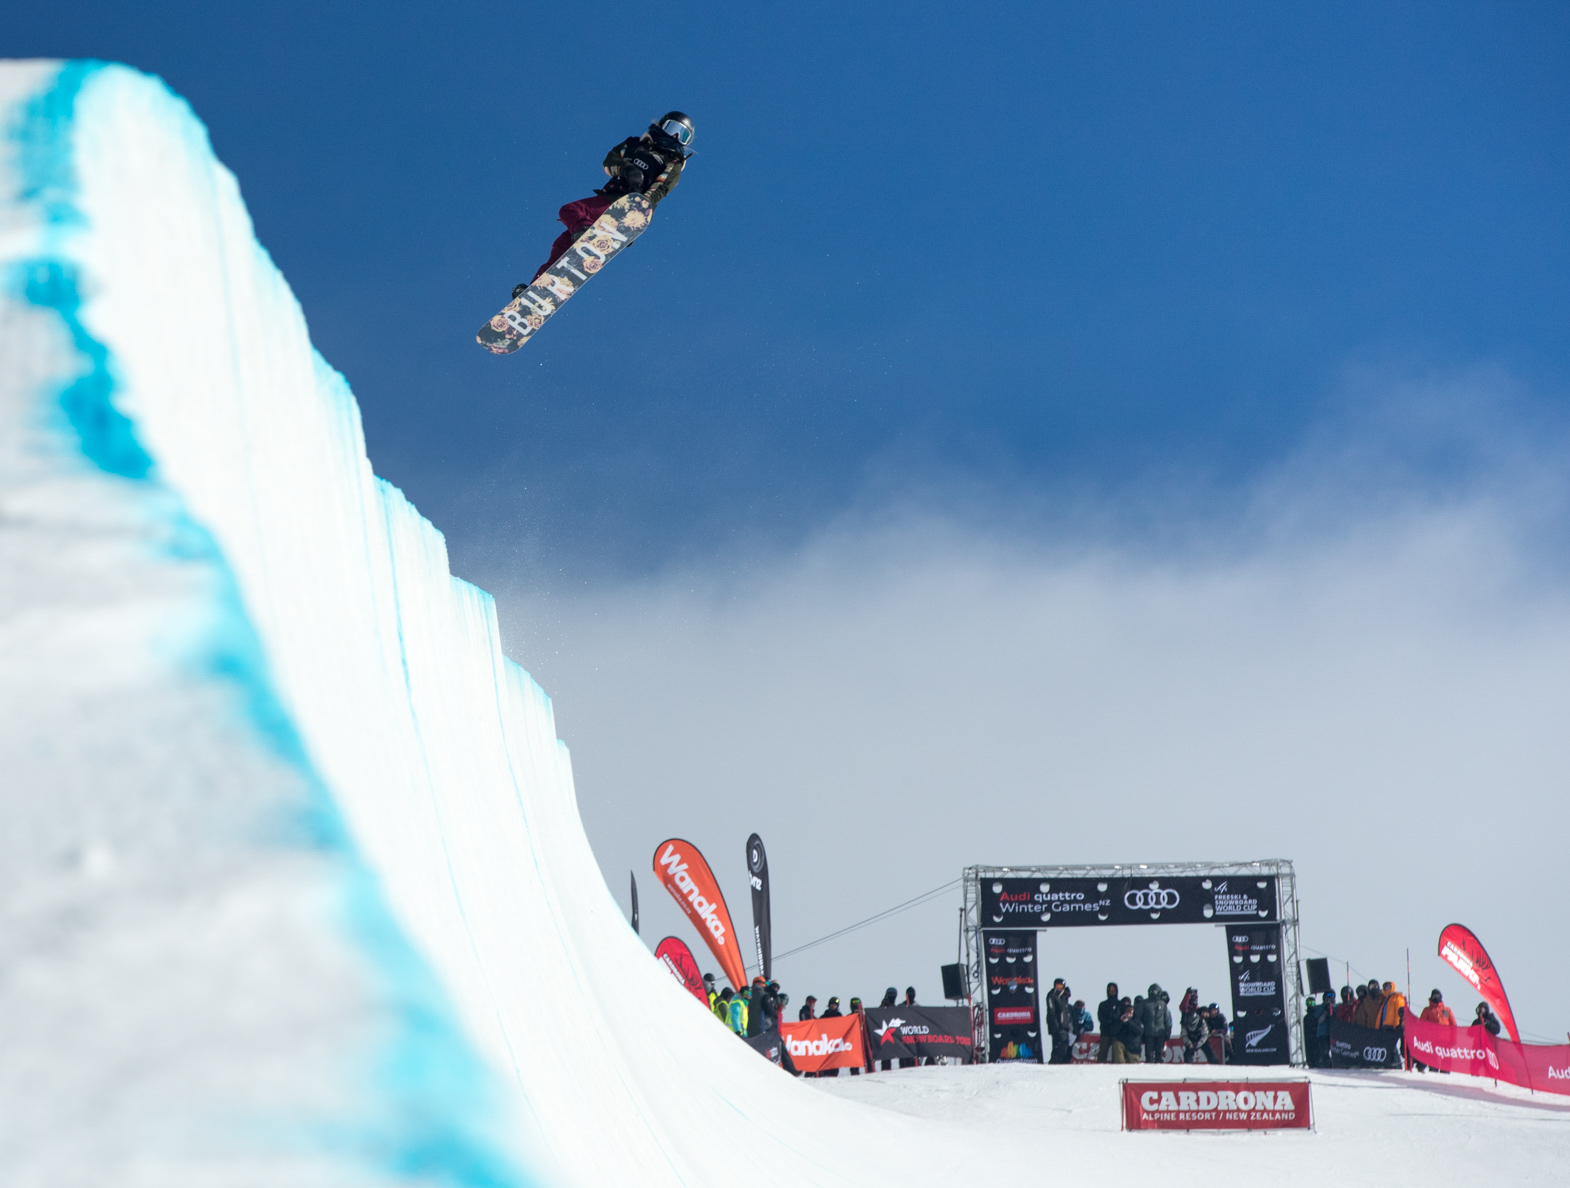 Monster Energy’s Chloe Kim Wins Season’s First Snowboard Halfpipe World Cup at the  Winter Games in New Zealand